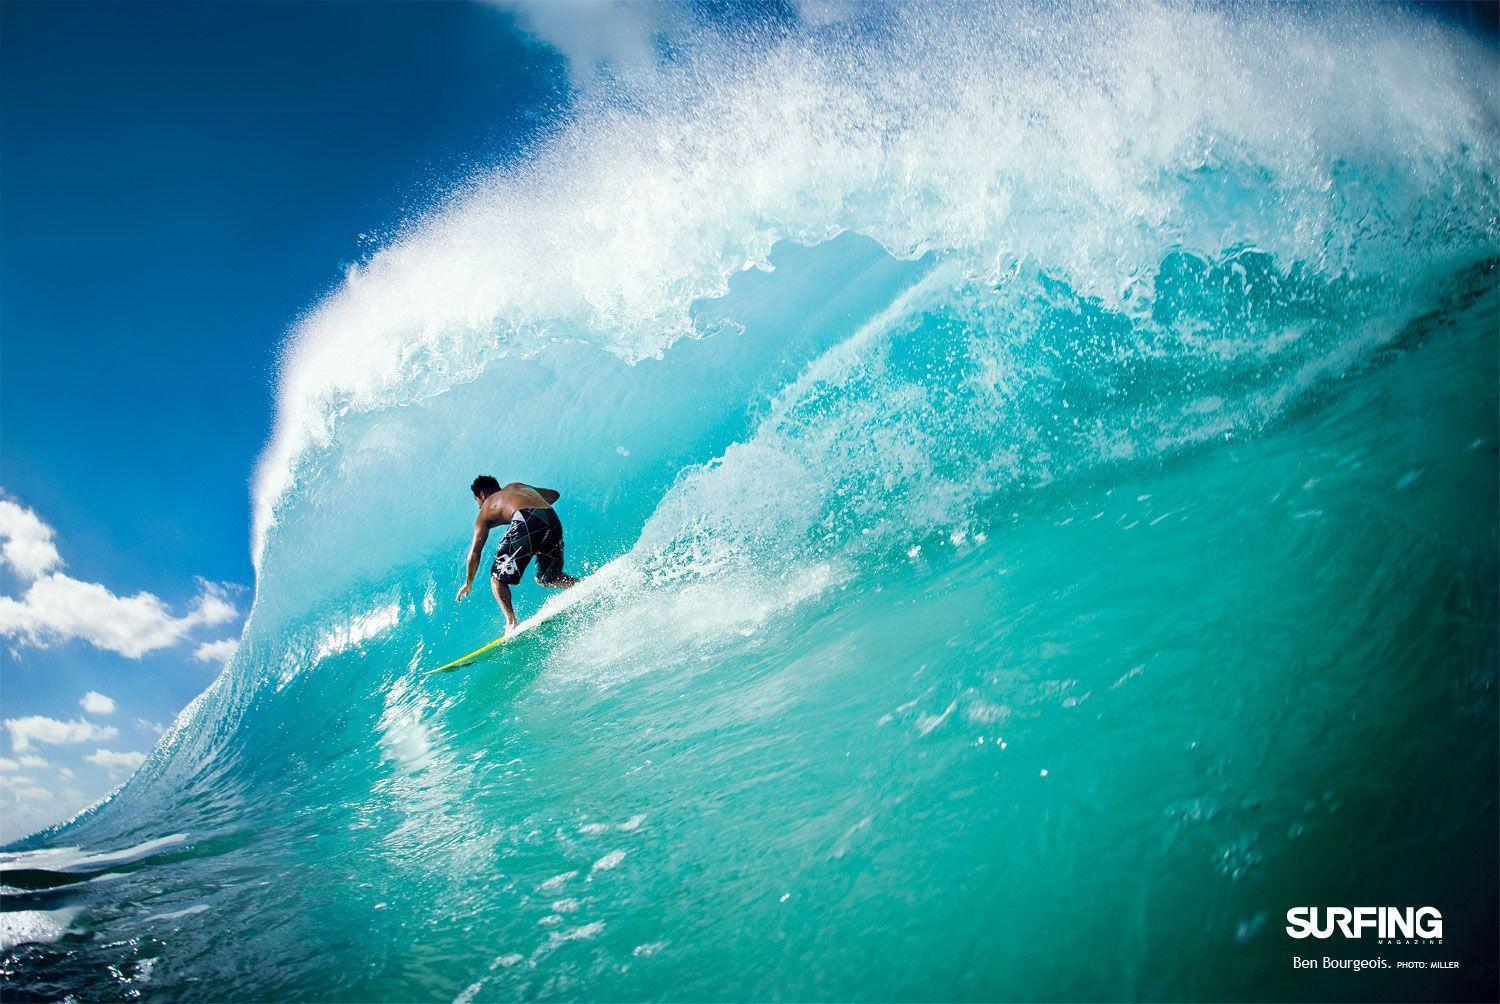 Desktop Wallpaper Awesome Photo From Surfing Magazine